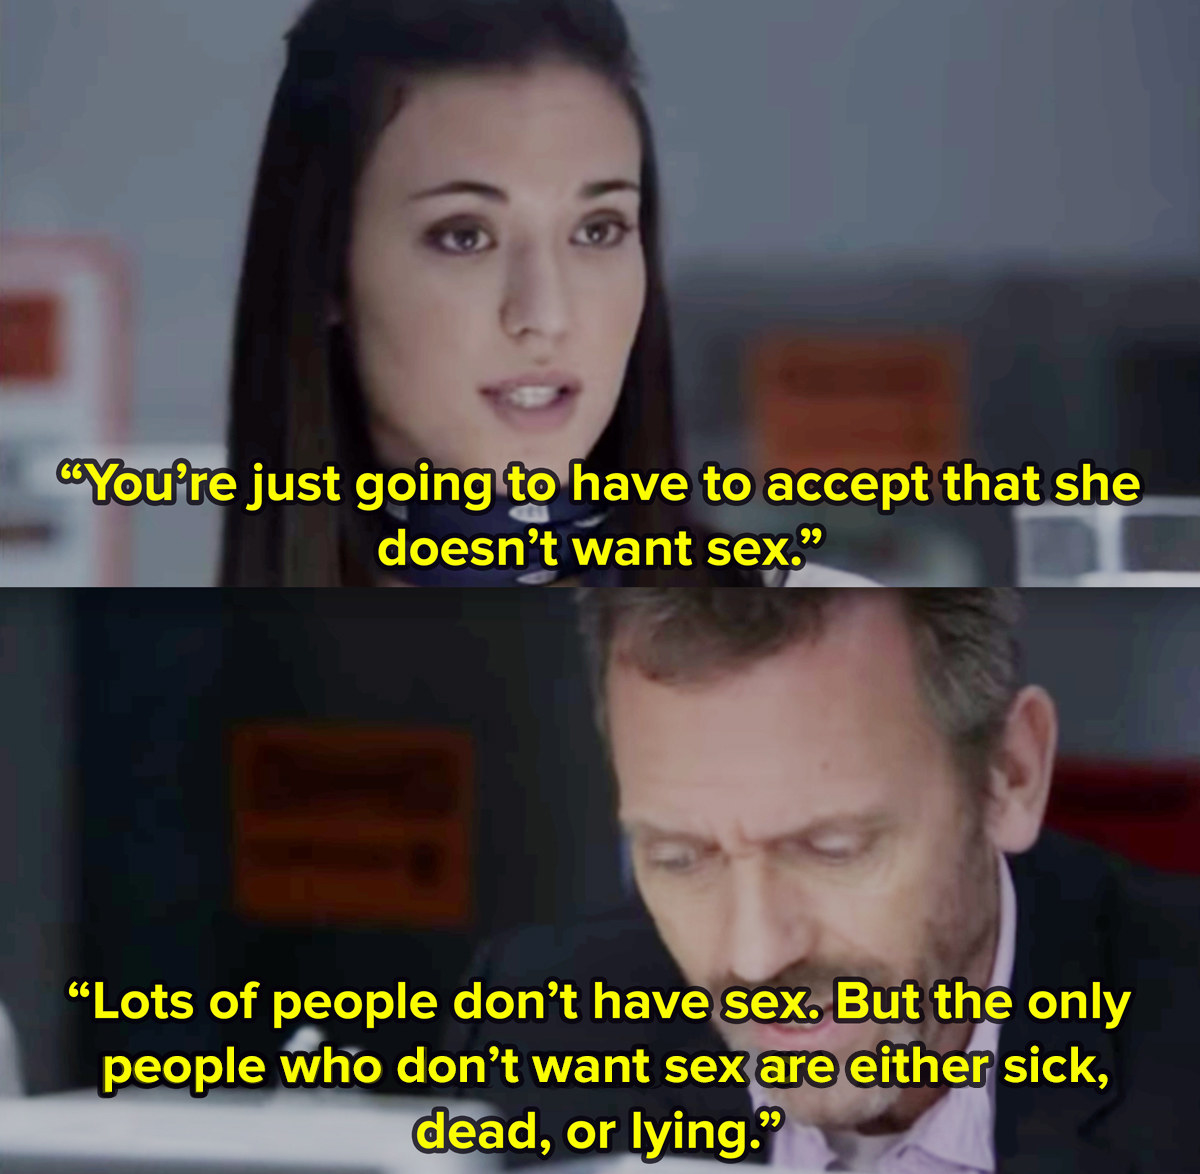 A close-up female character in TV show House tells Dr House that he&#x27;s going to have to  accept that an unseen patient doesn&#x27;t want to have sex. He replies lot&#x27;s of people don&#x27;t have sex, but you&#x27;d have to be sick, dead, or lying not to want sex